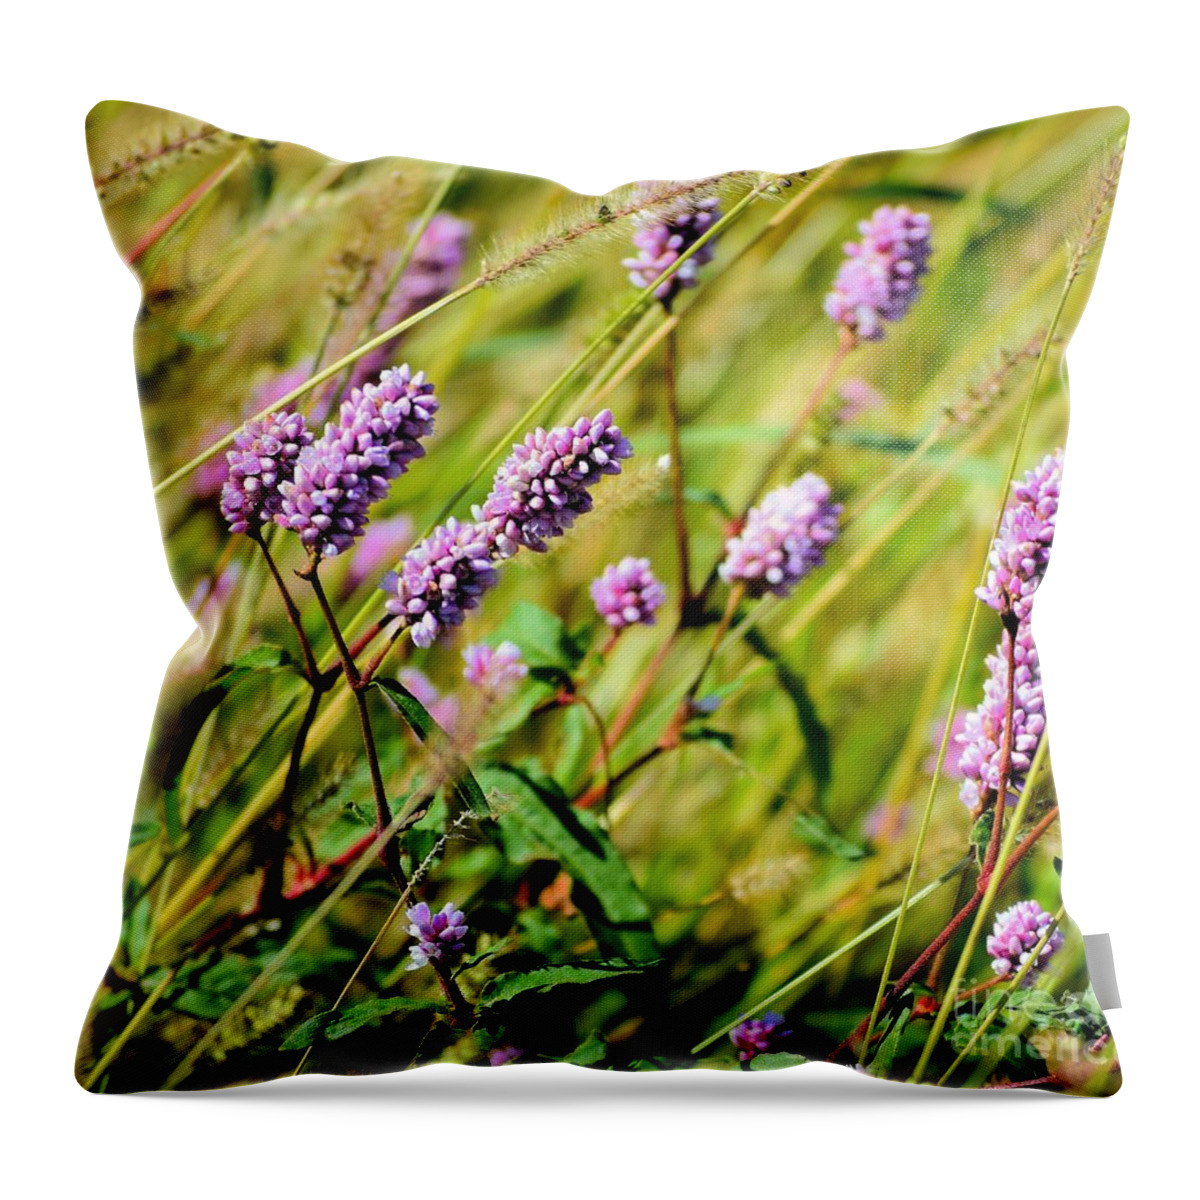 Floral Throw Pillow featuring the photograph Kansas Smartweed by Janette Boyd